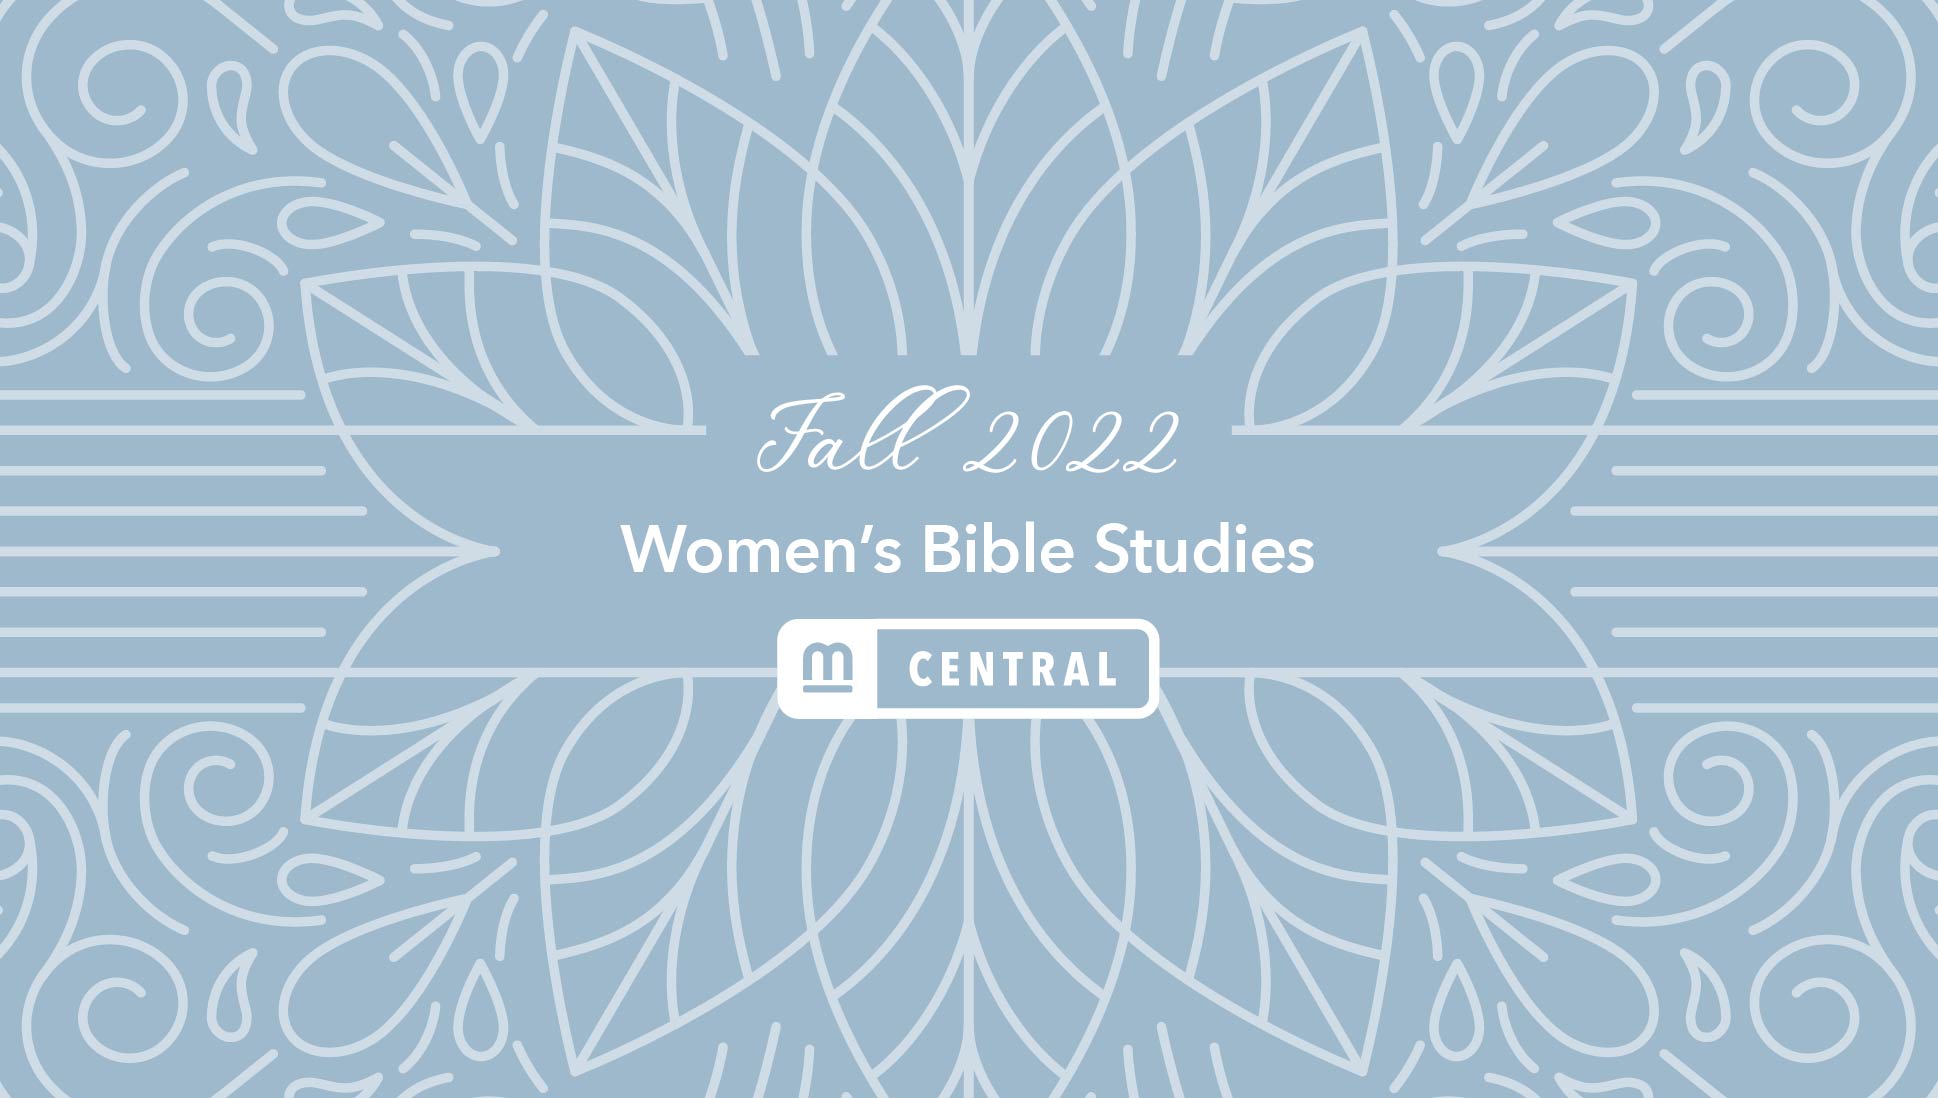 Women’s Bible Study - Mission City Central